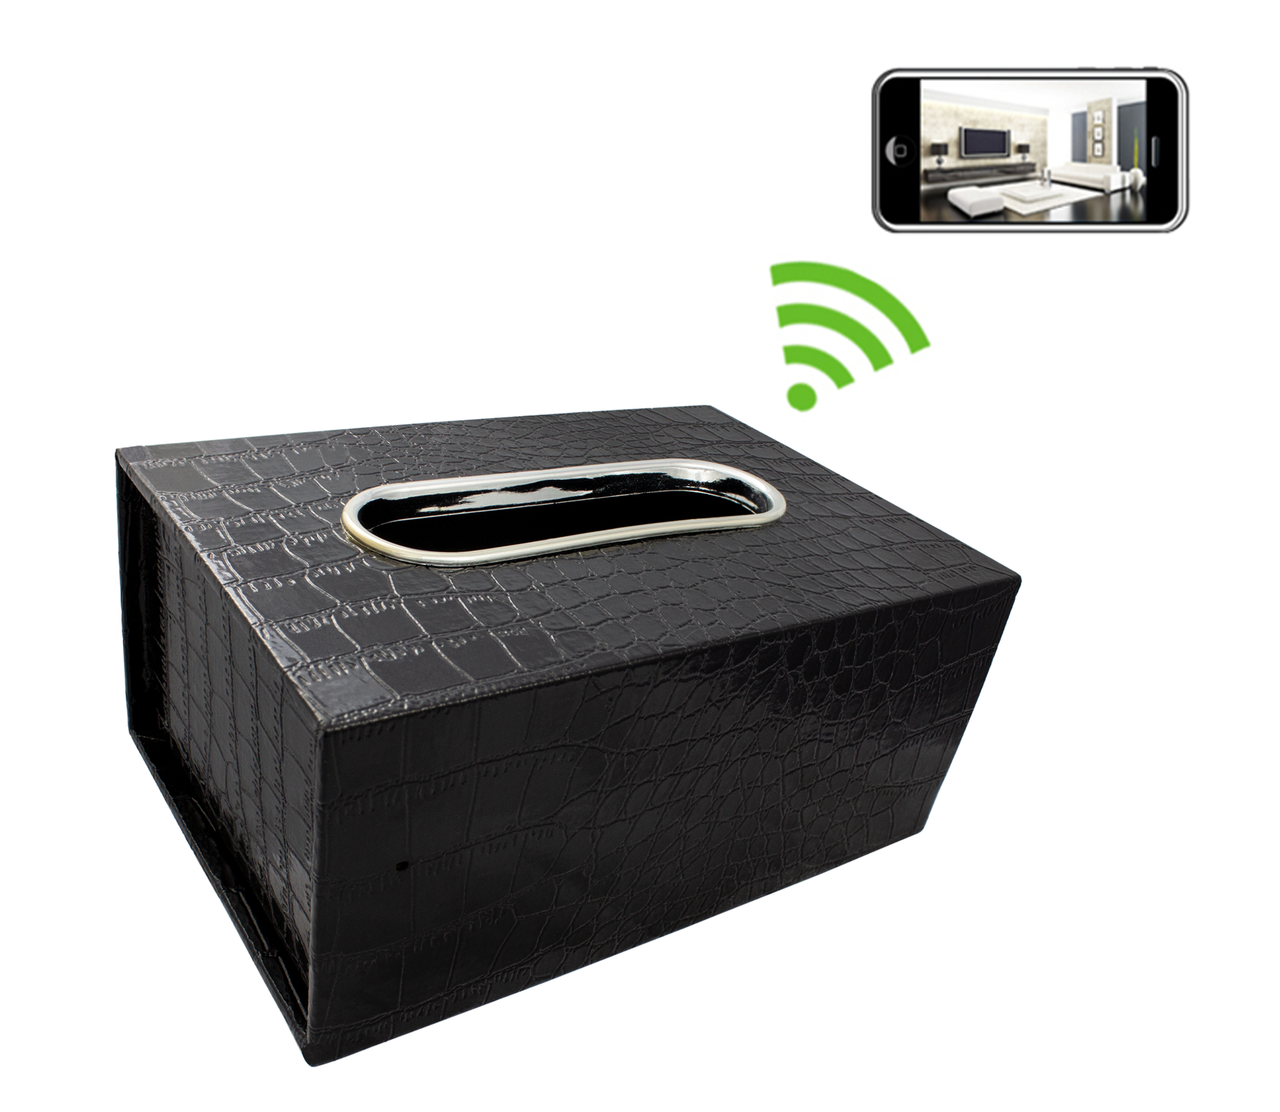 Black Box Power Bank Hidden Camera with DVR and WiFi 1920x1080